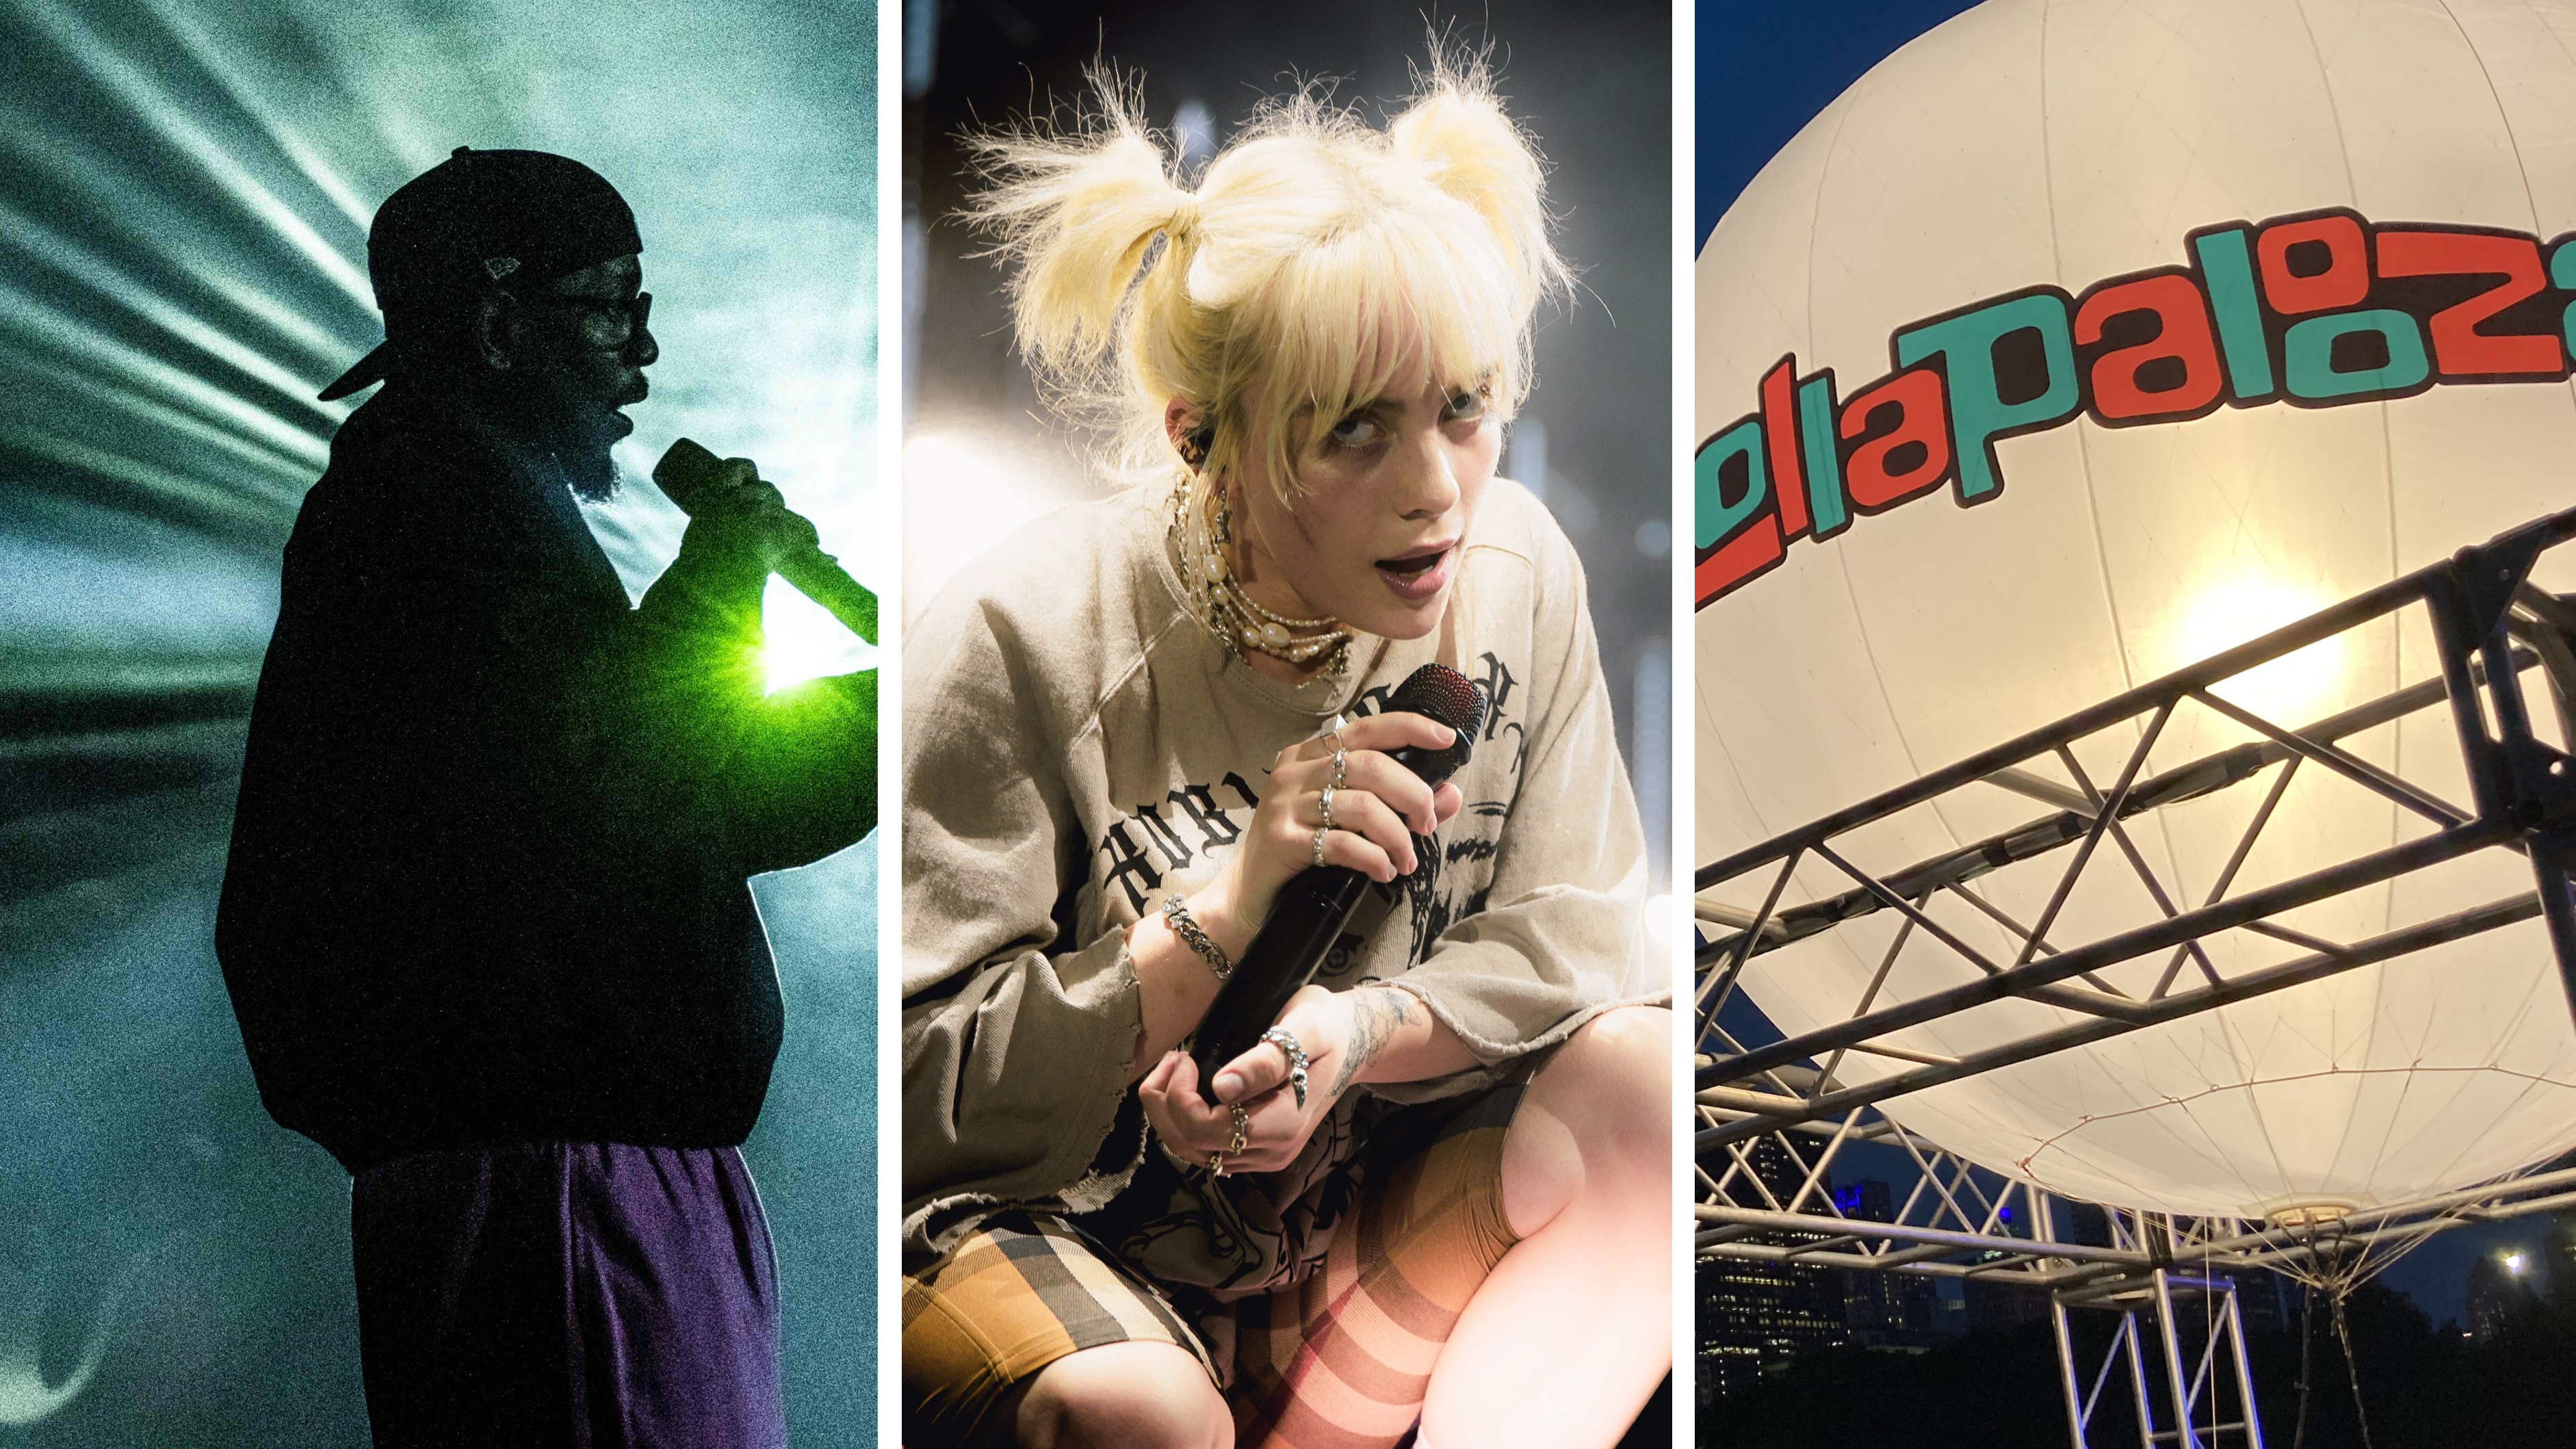 Music, food and more in the spotlight at Lollapalooza